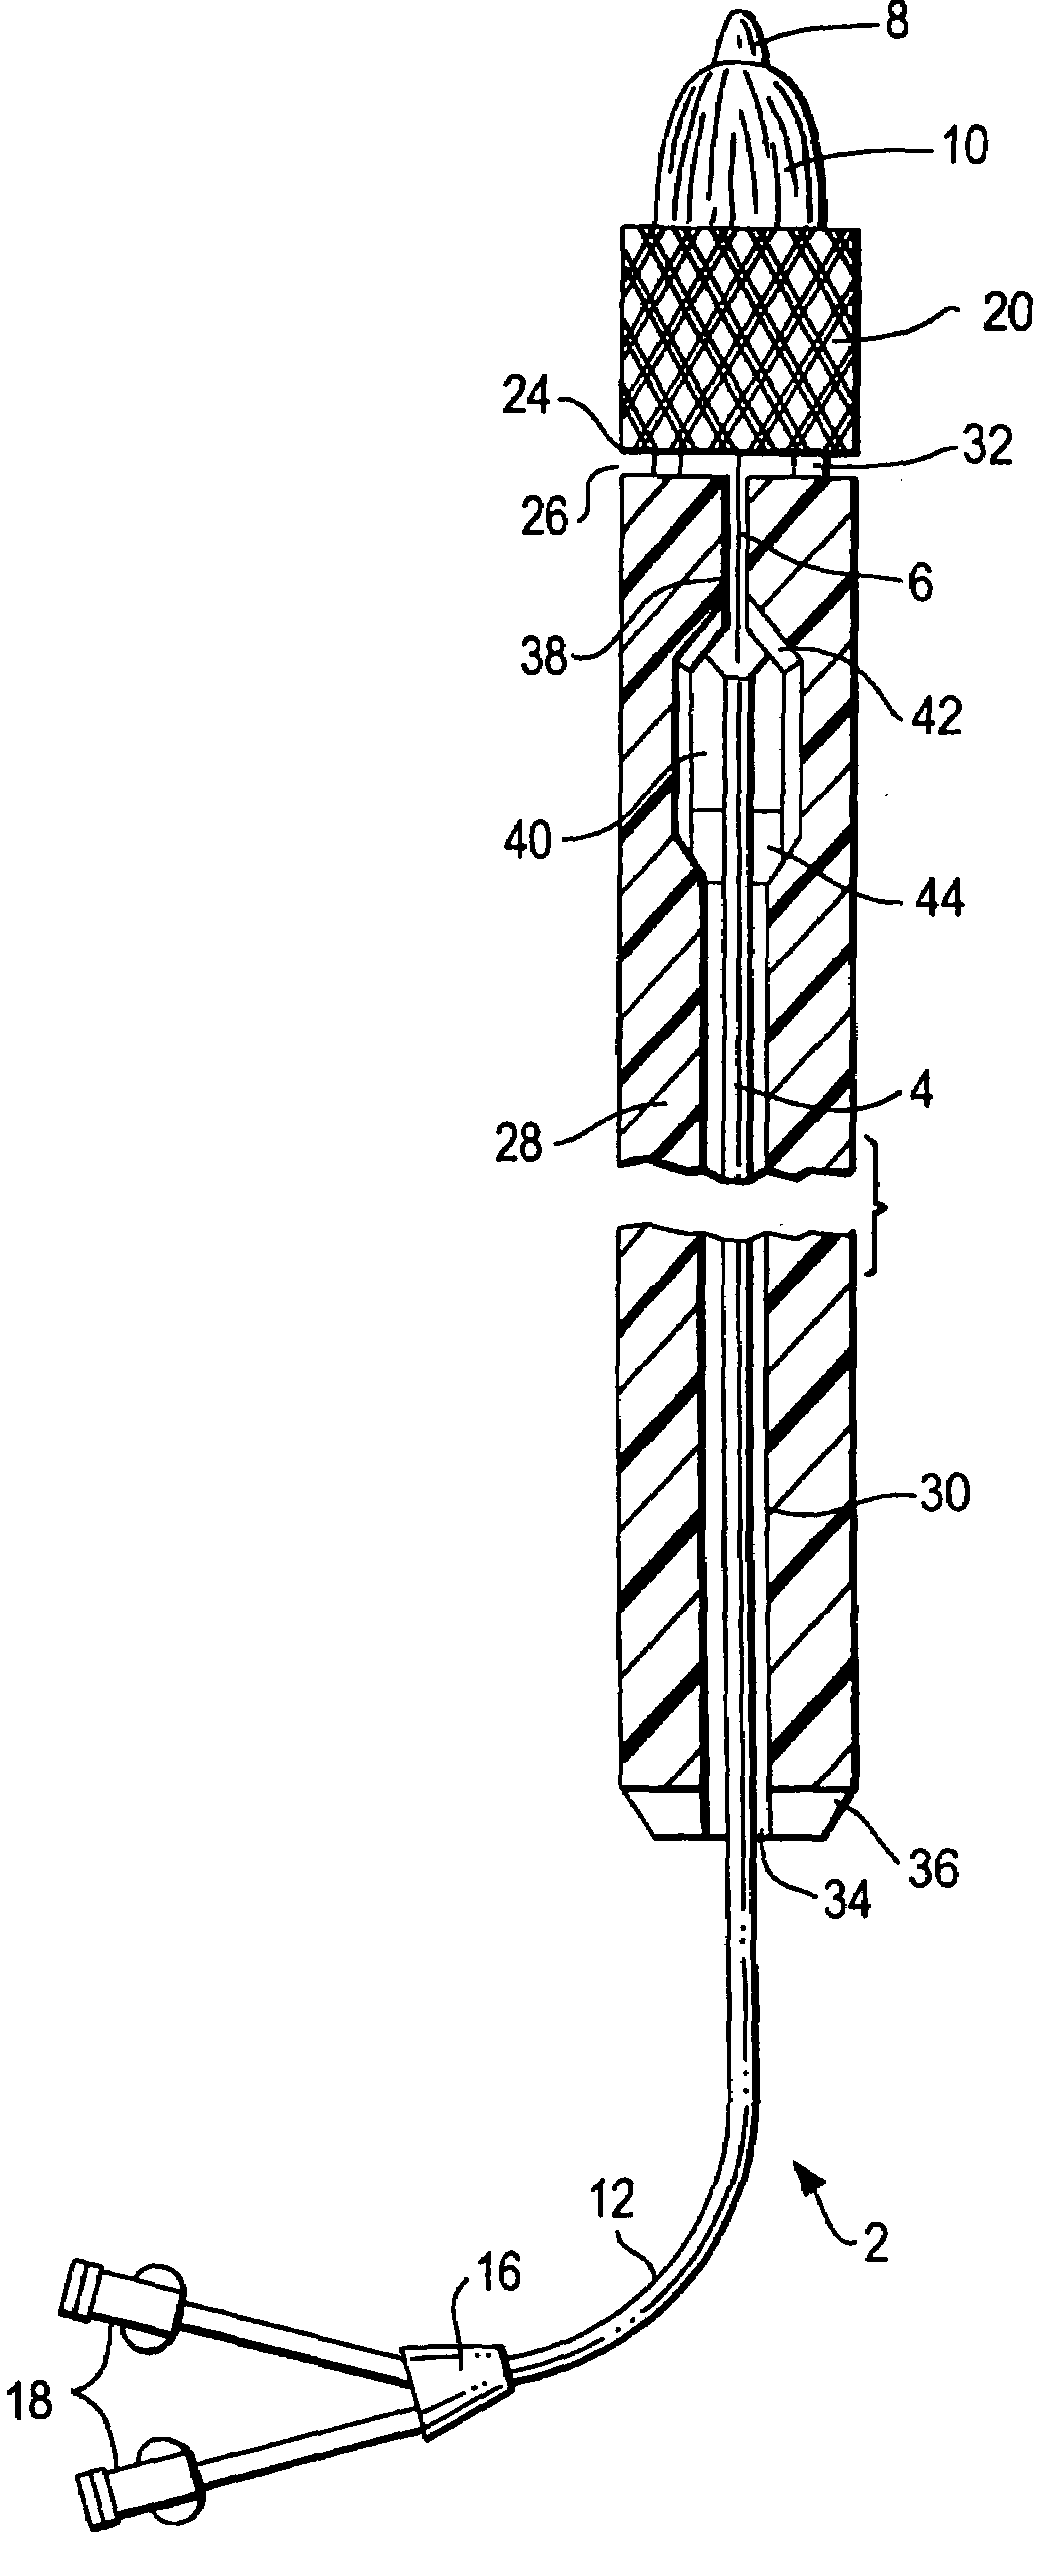 Device and method for assisting in the implantation of a prosthetic valve